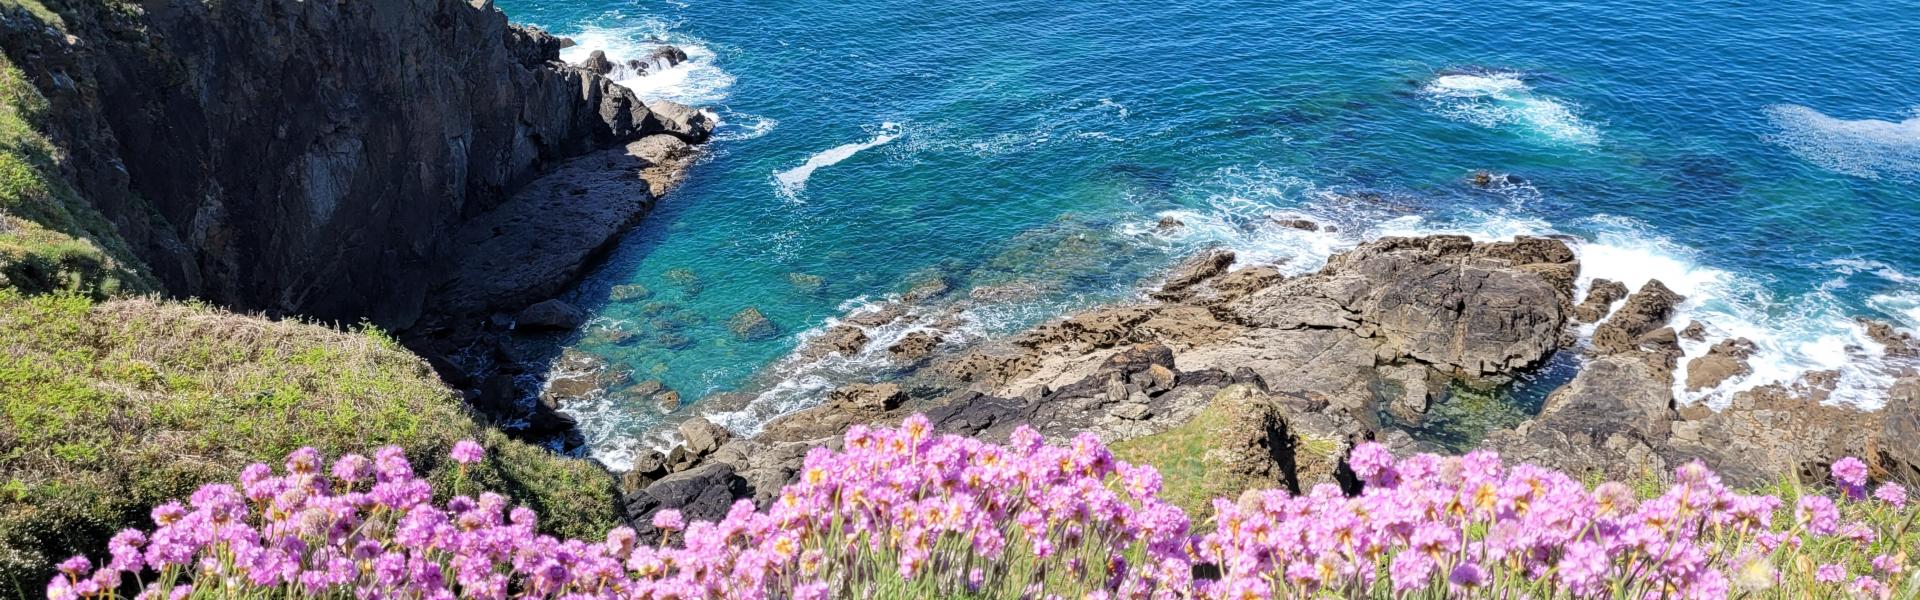 purple flowers on rocky shore during daytime